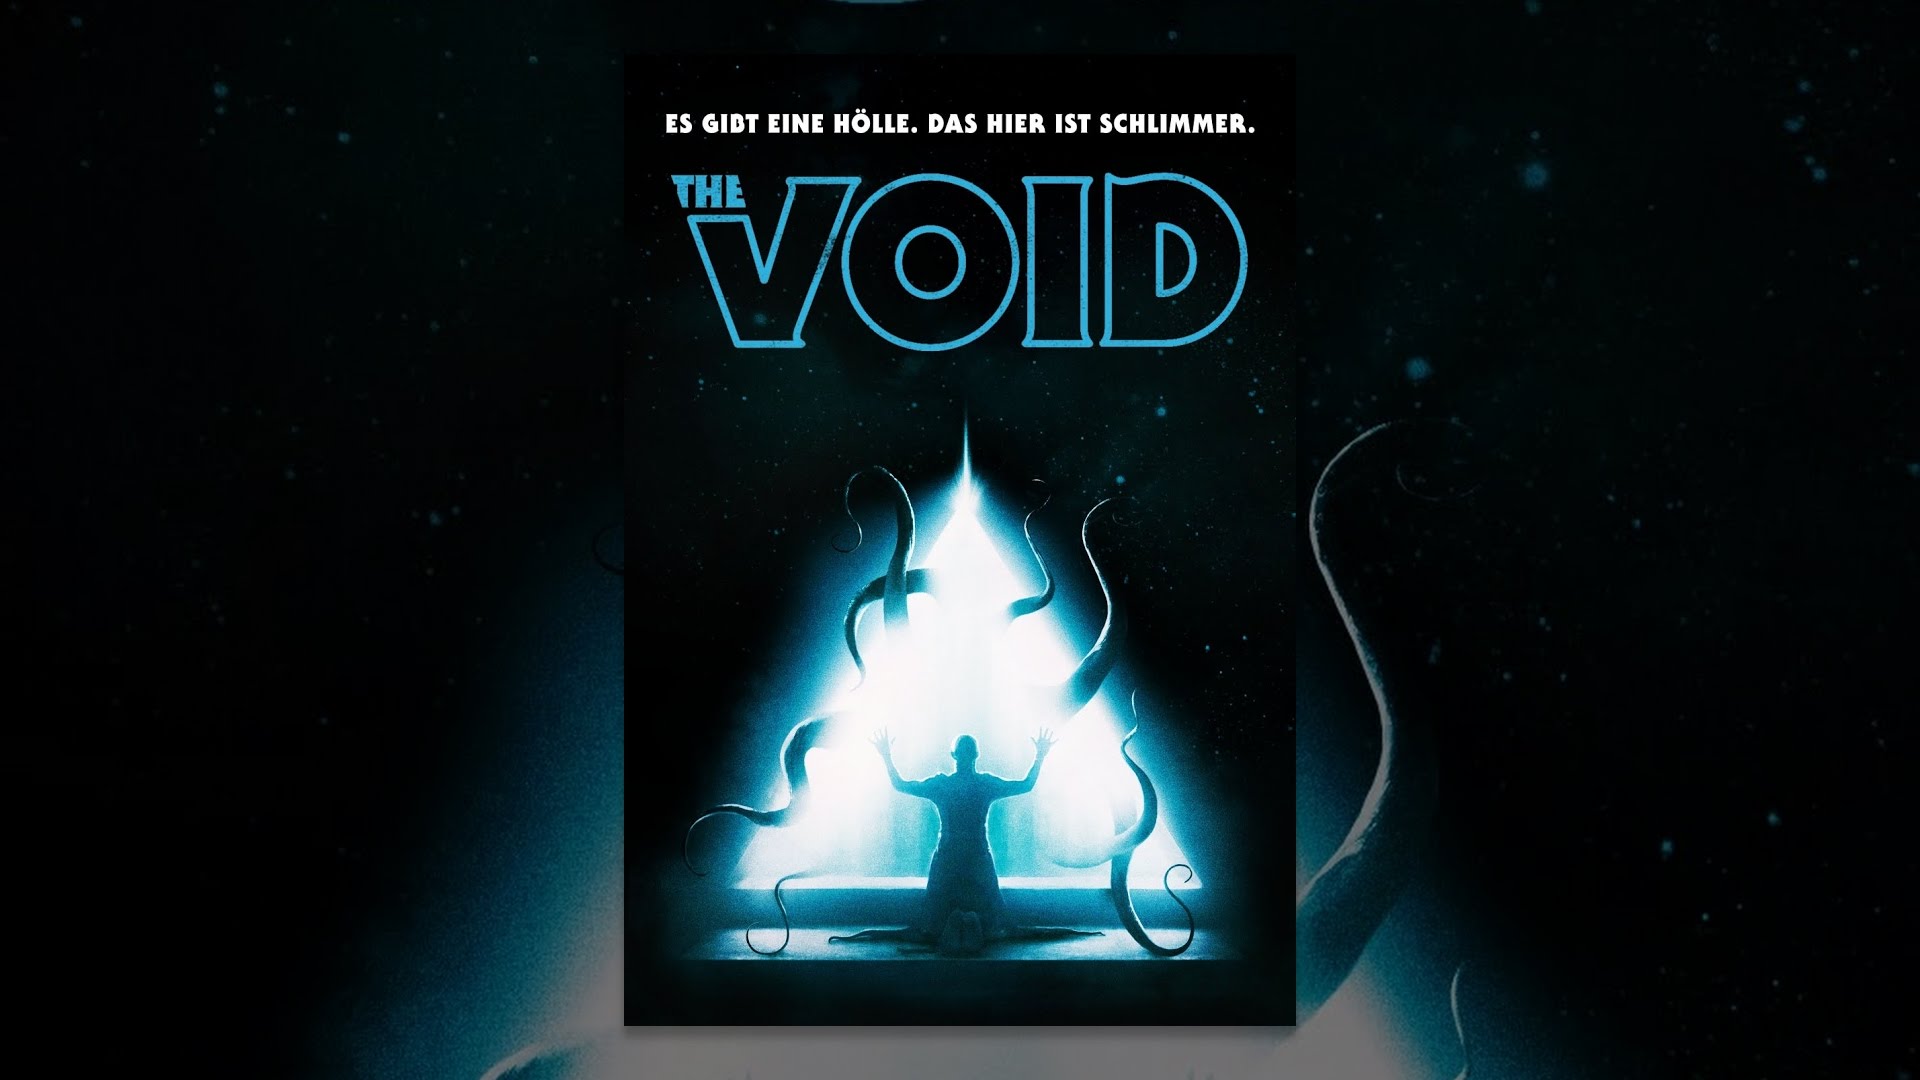 Voice of the void plush. A Void. Voices of the Void.